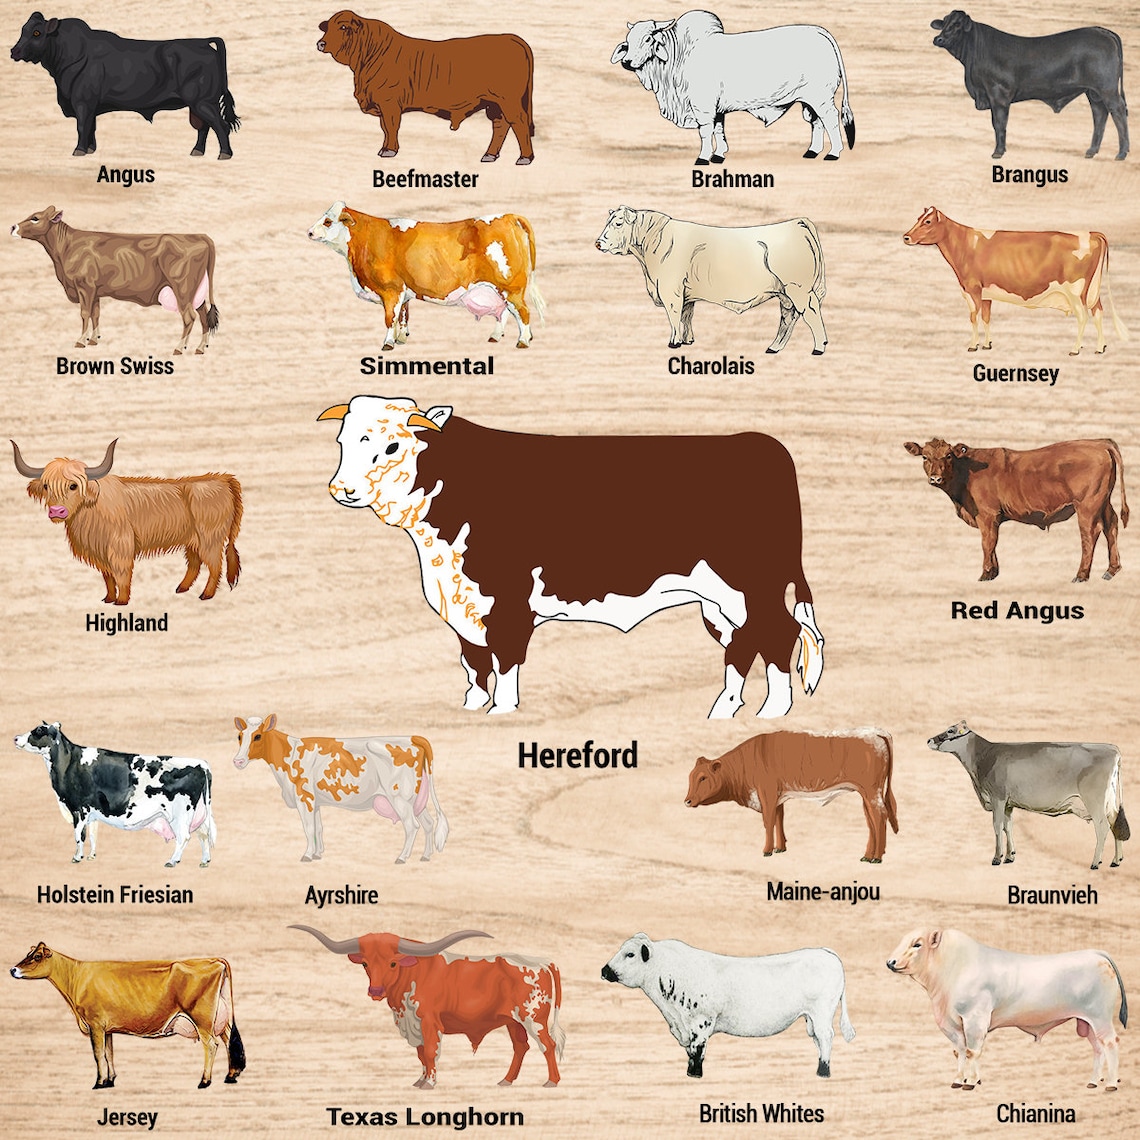 Cattle Of Cows Breeds Types